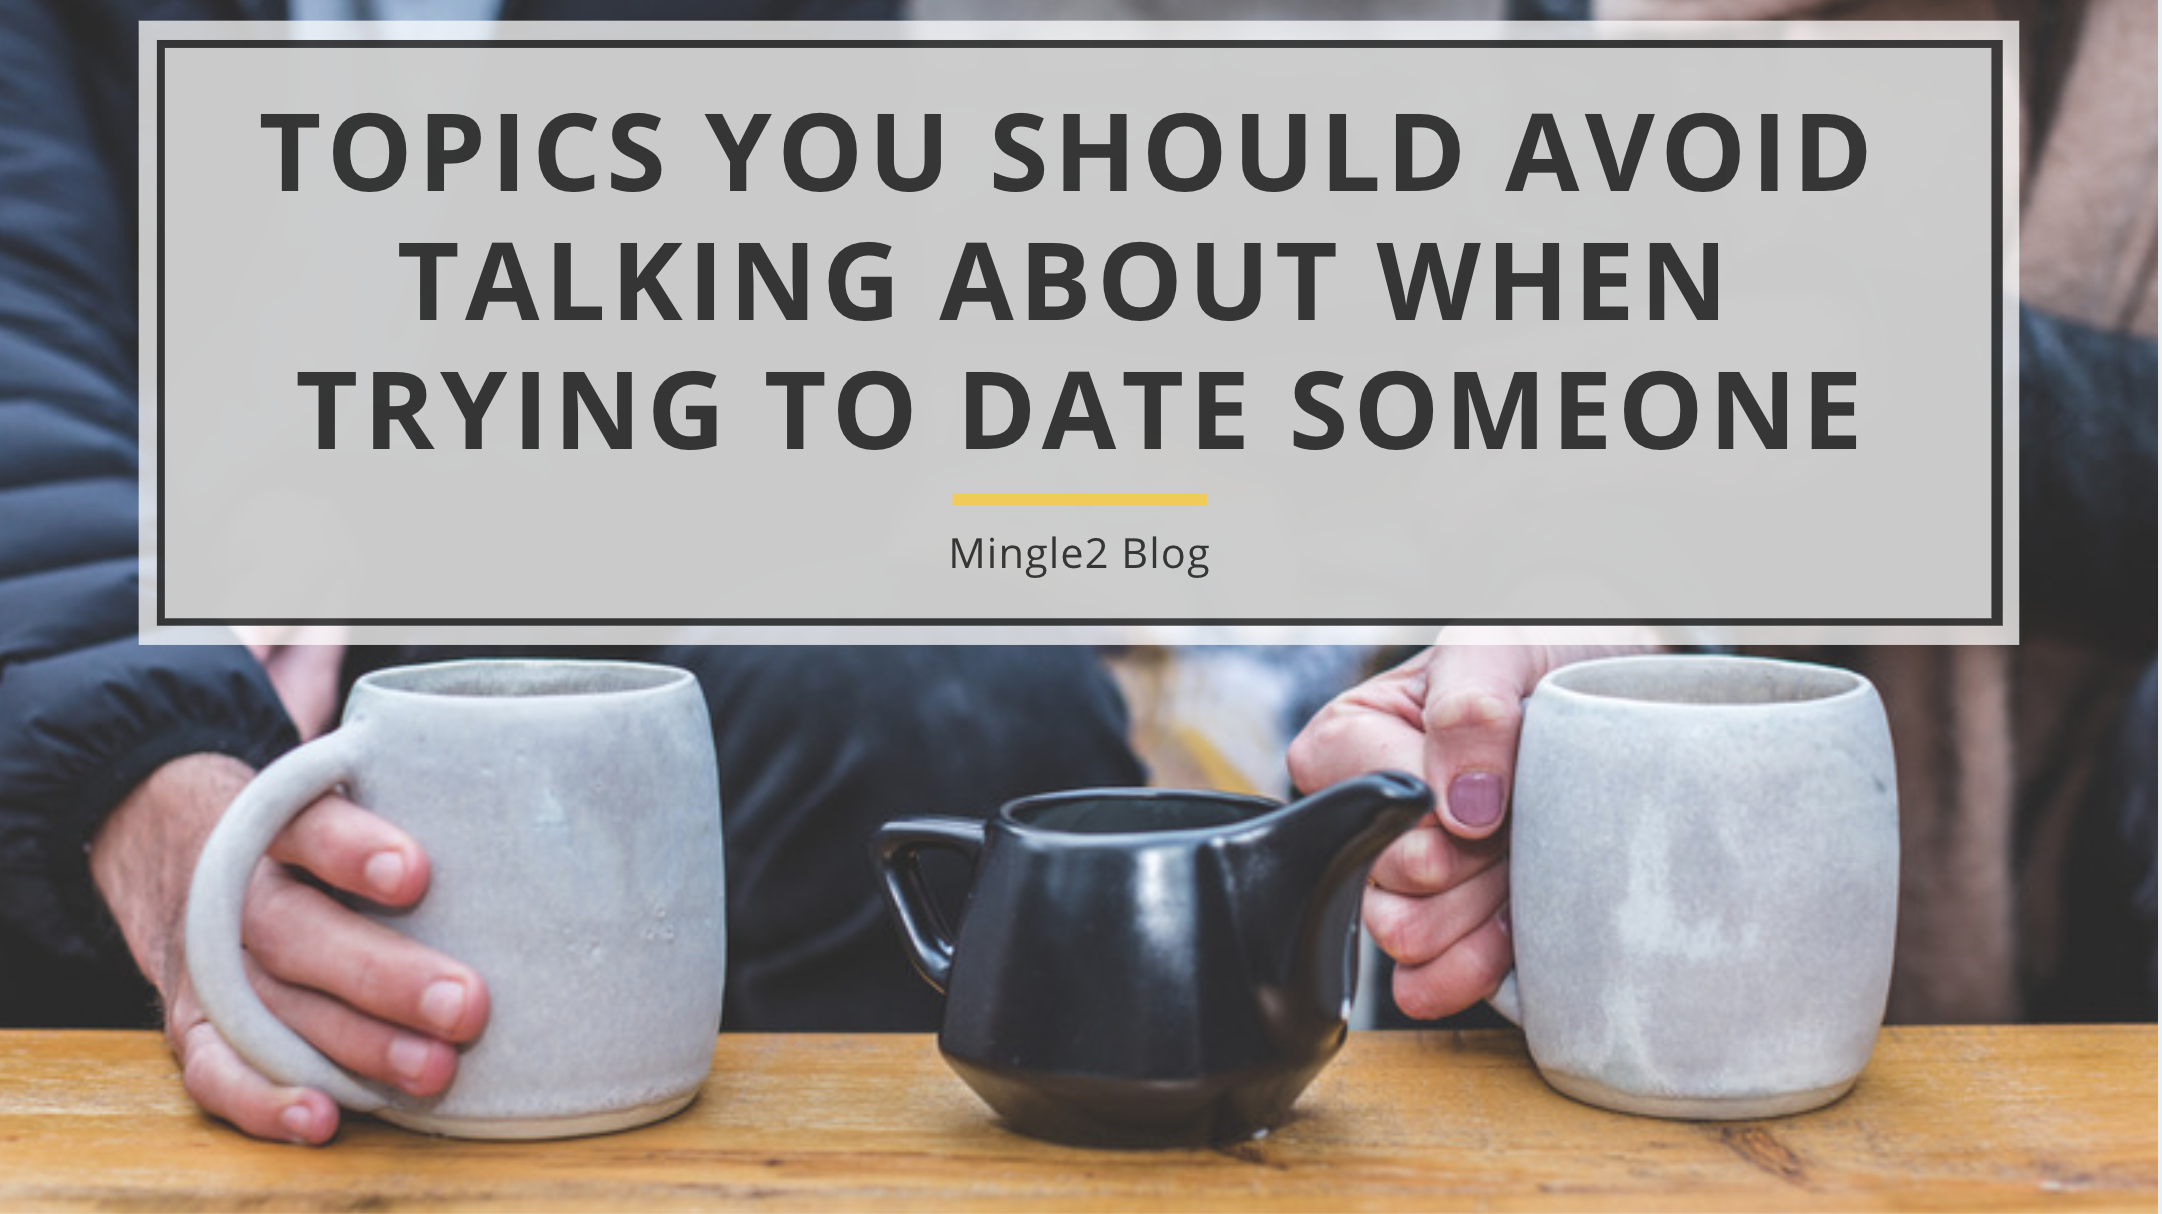 Topics You Should Avoid Talking About When Trying To Date Someone Mingle2 S Blog